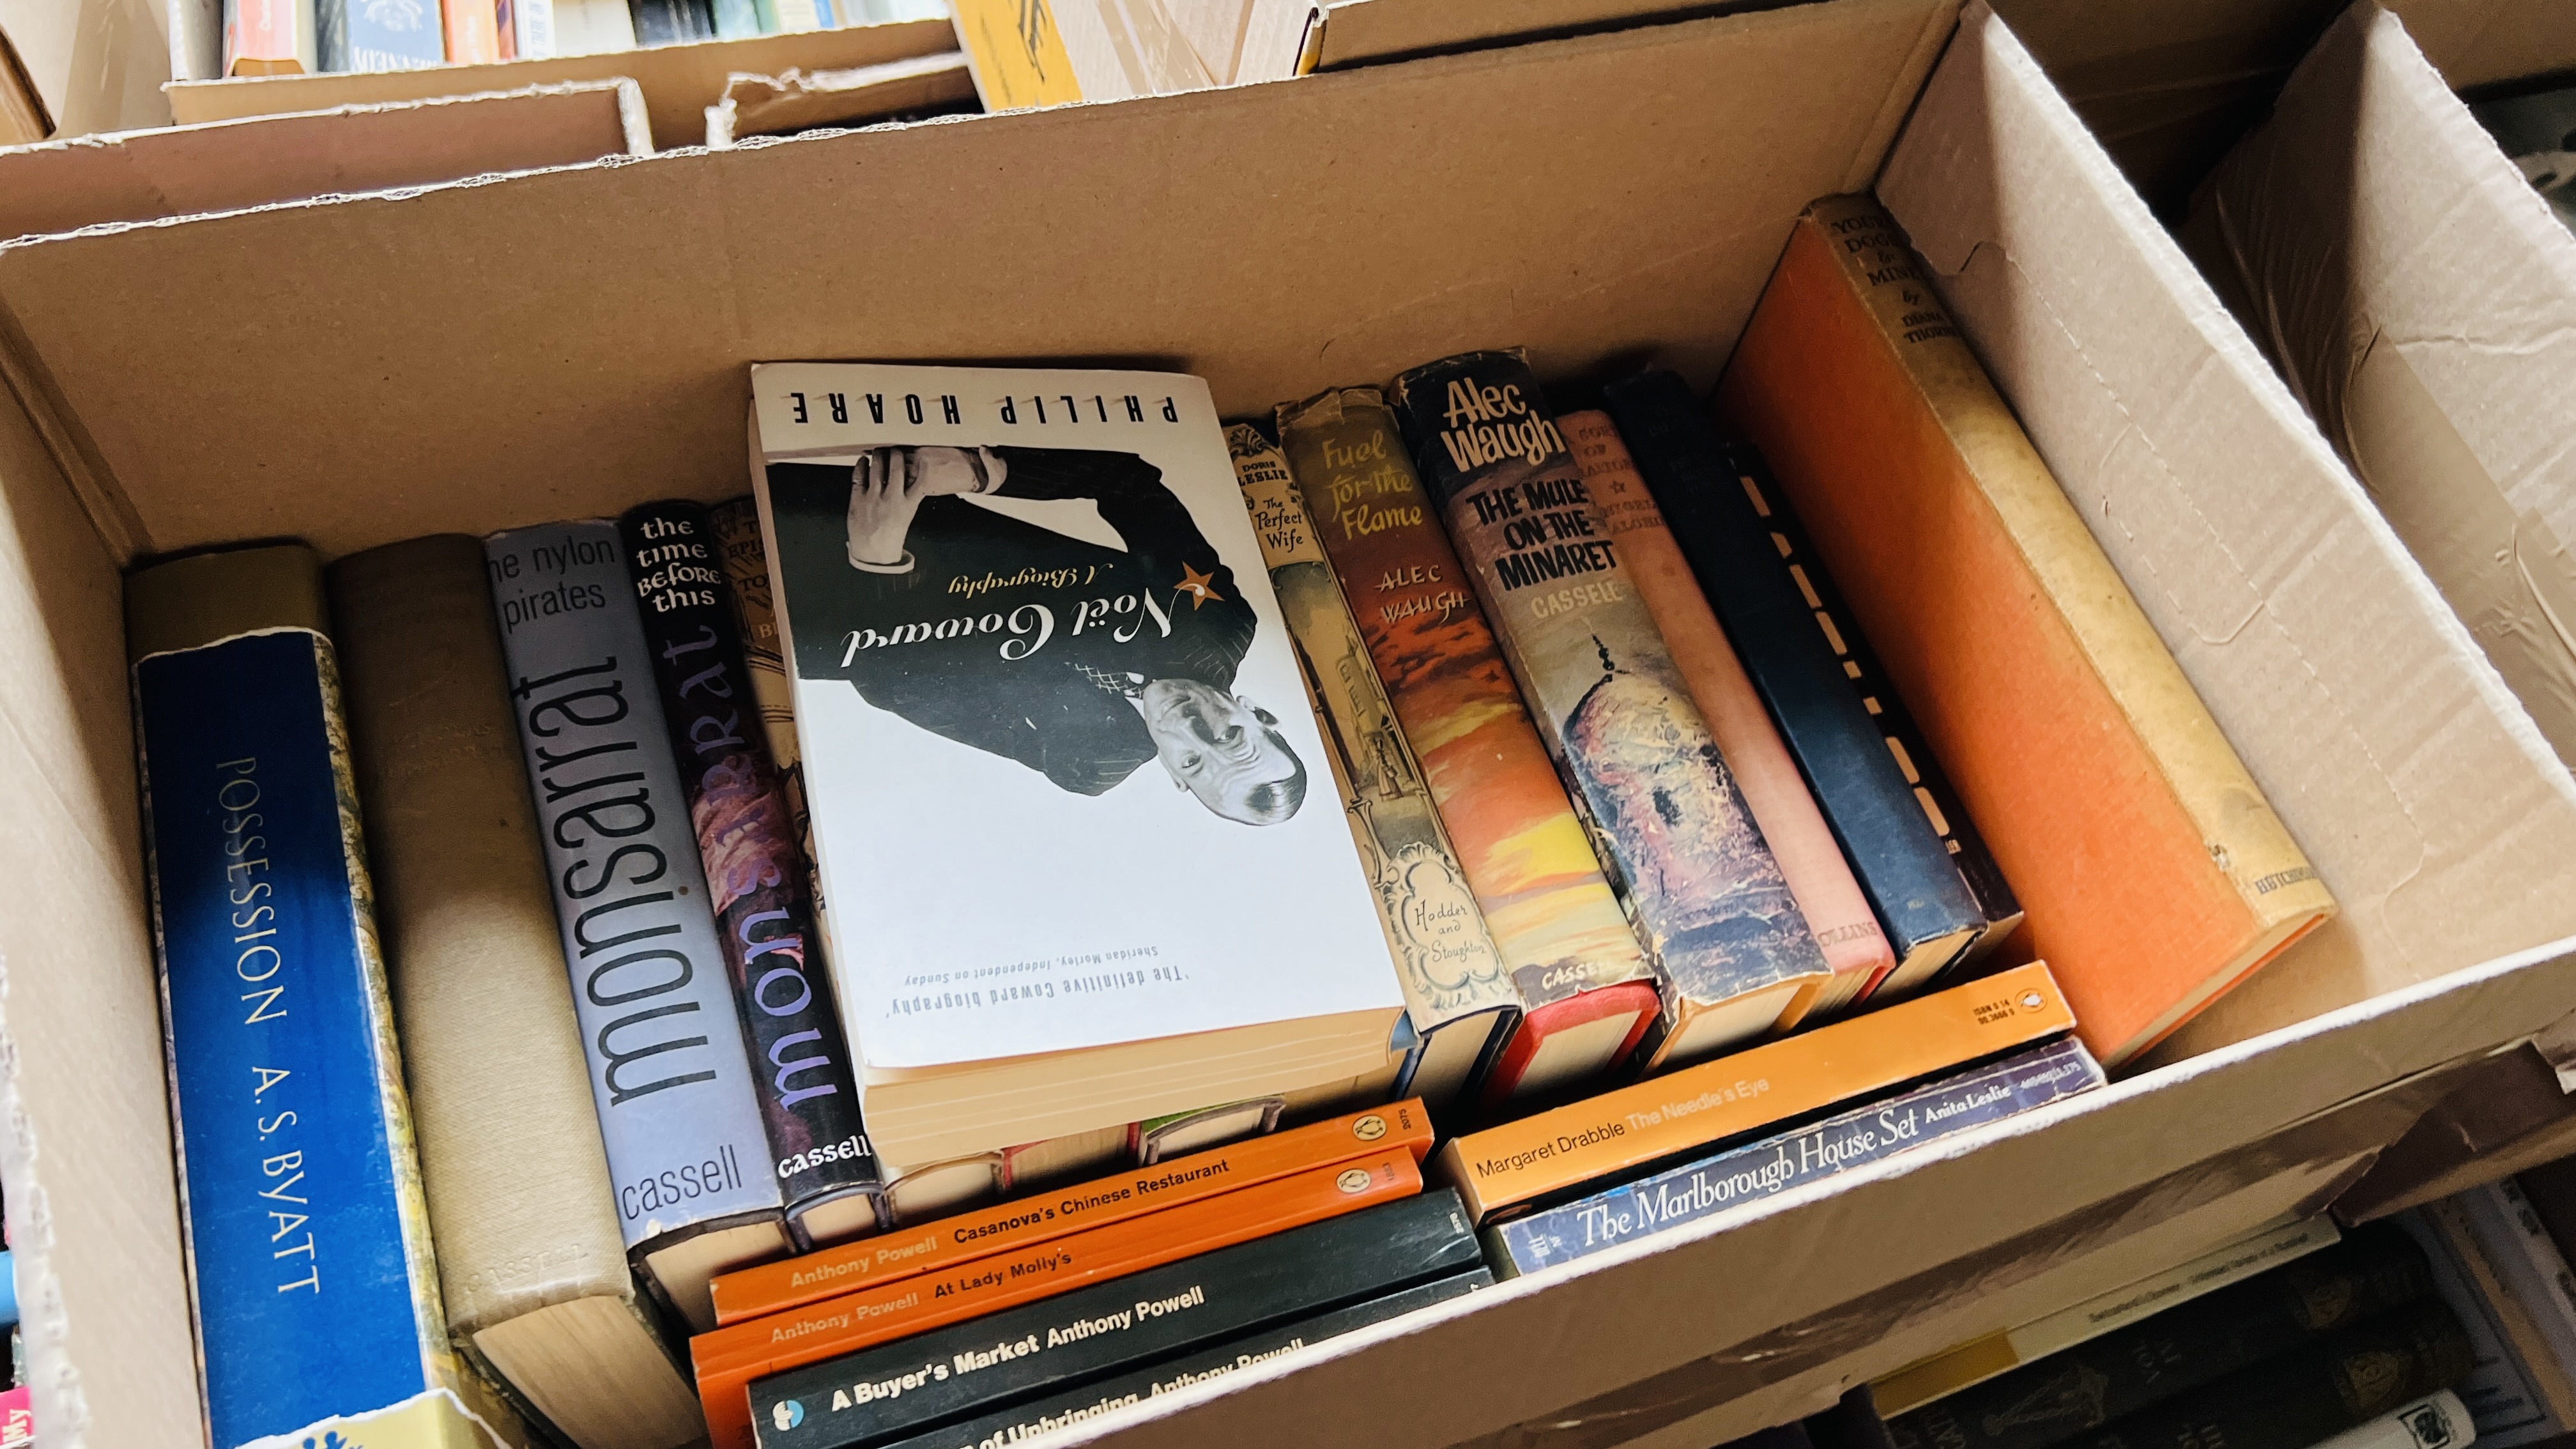 20 BOXES OF ASSORTED BOOKS - AS CLEARED TO INCLUDE NOVELS, REFERENCE, JAPANESE AND ORIENTAL BOOKS. - Image 19 of 21